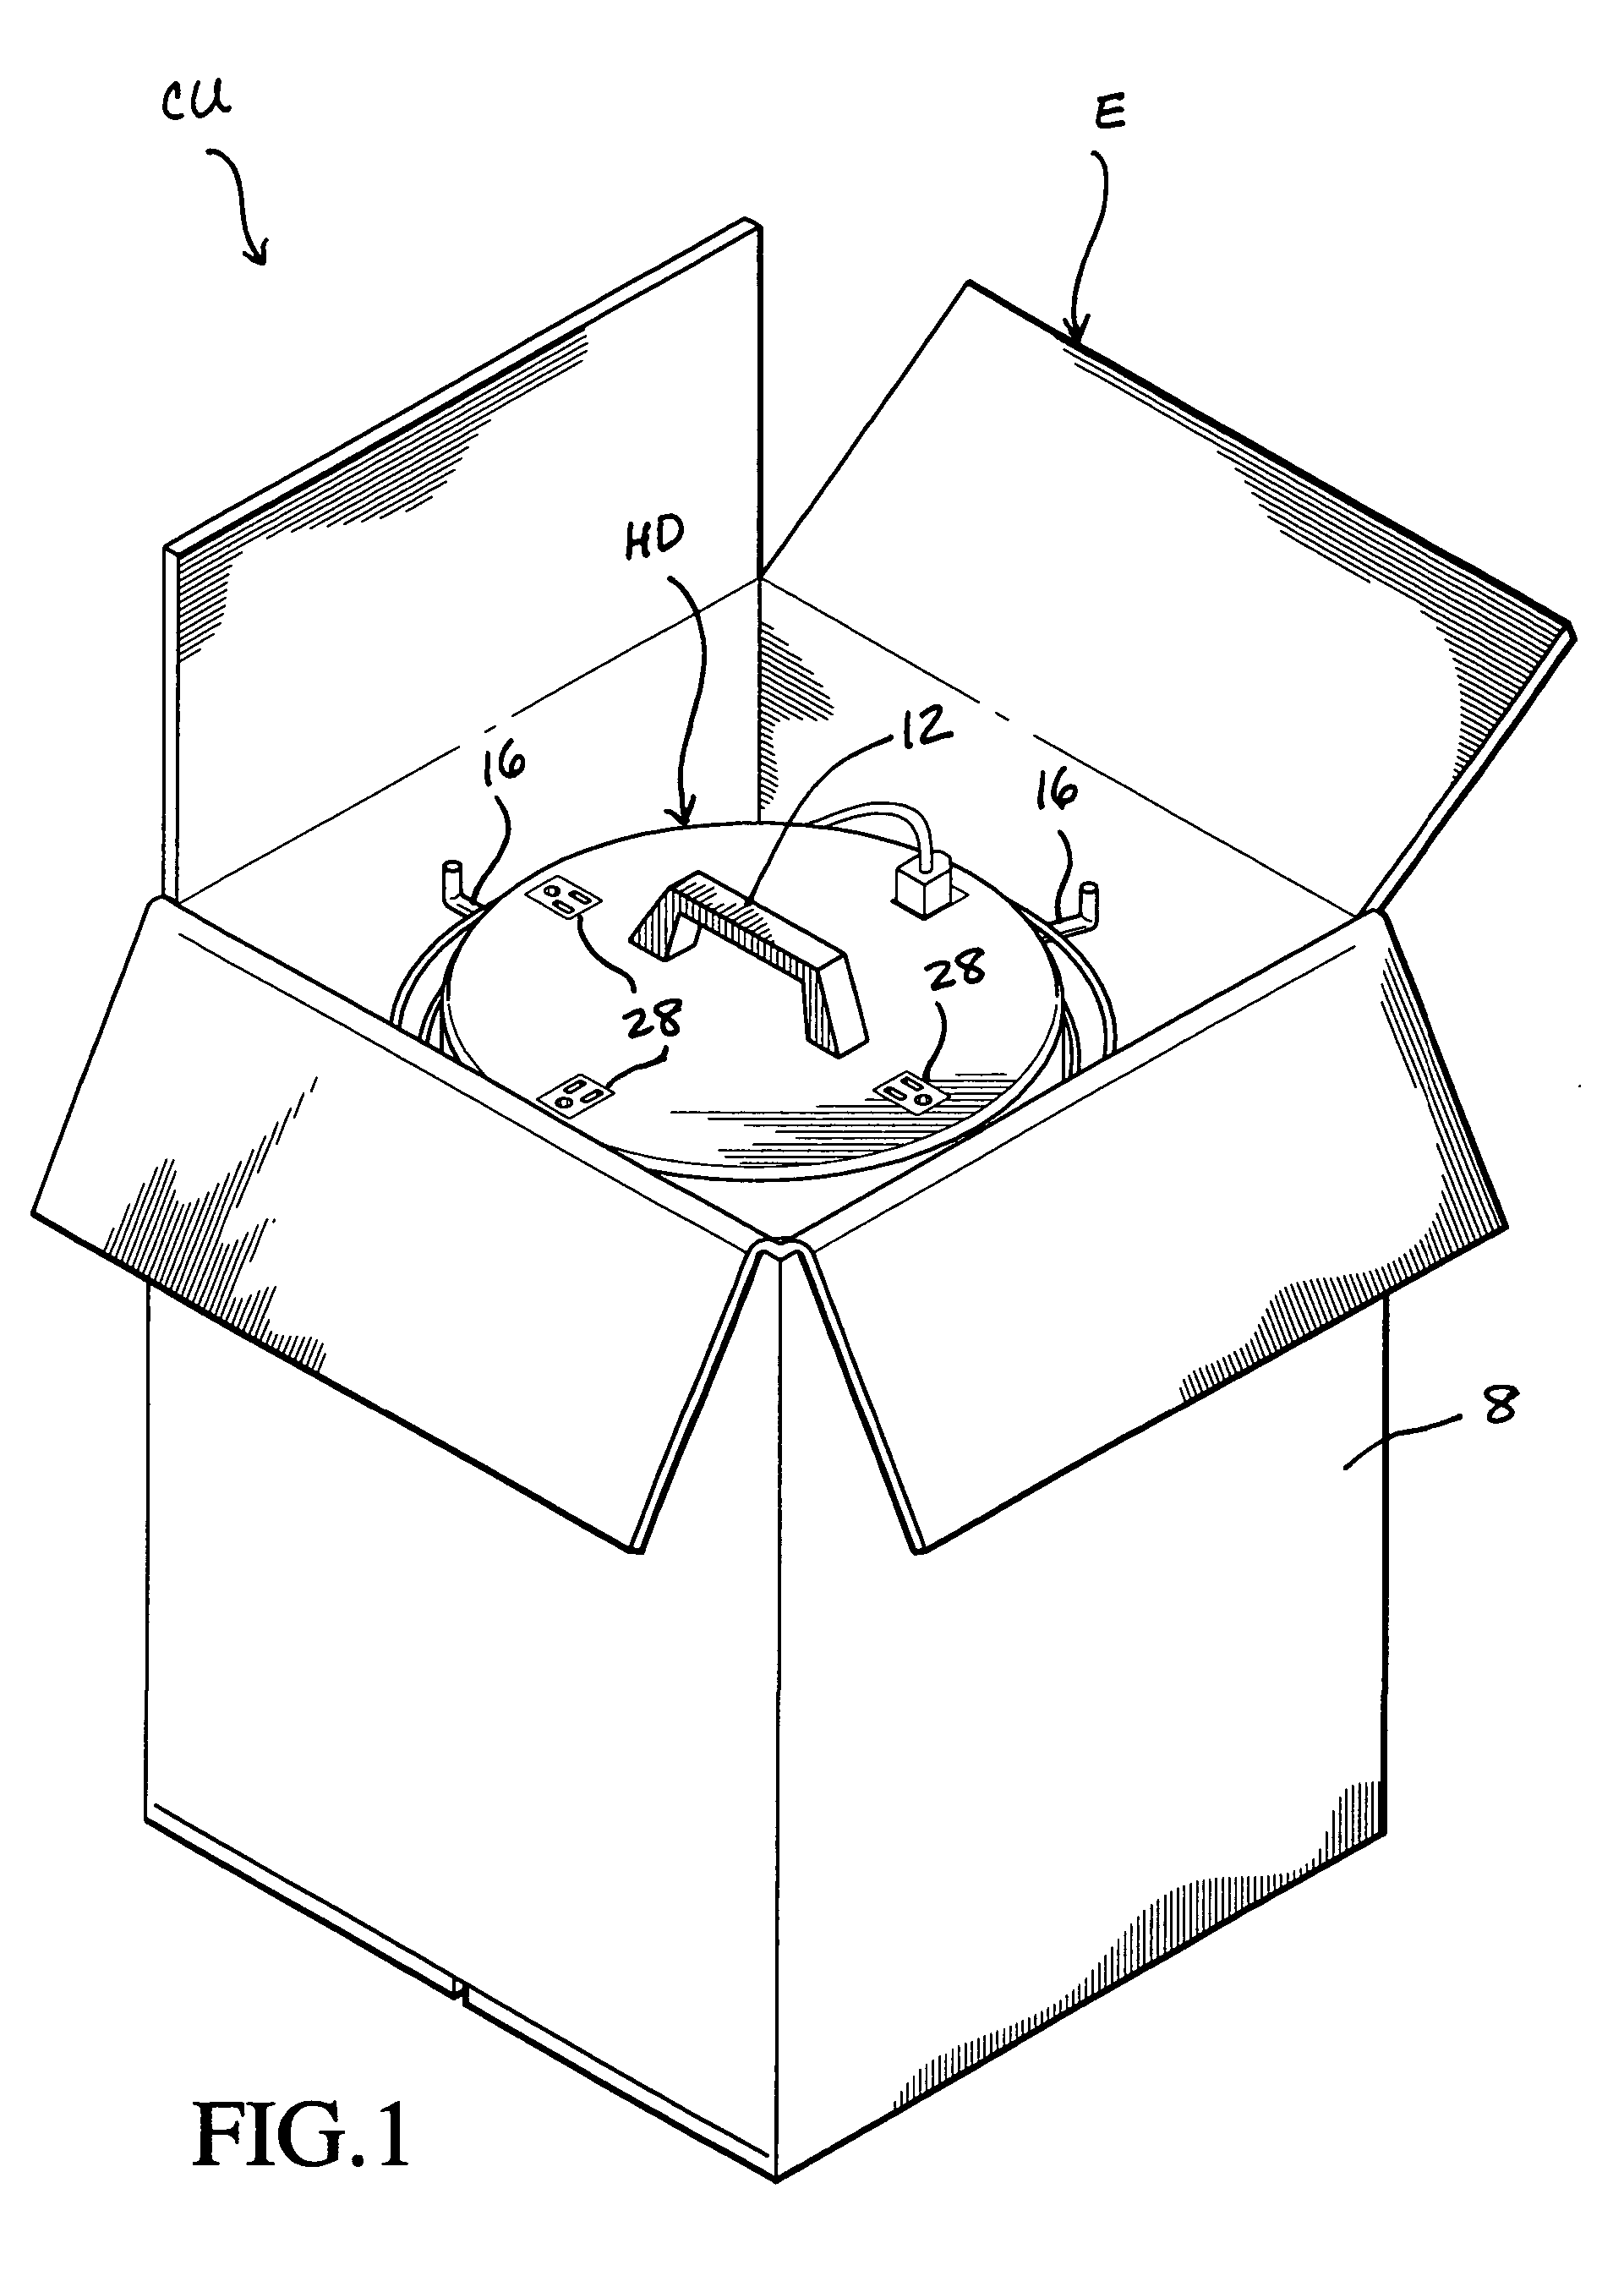 Device for holding decorative string lights